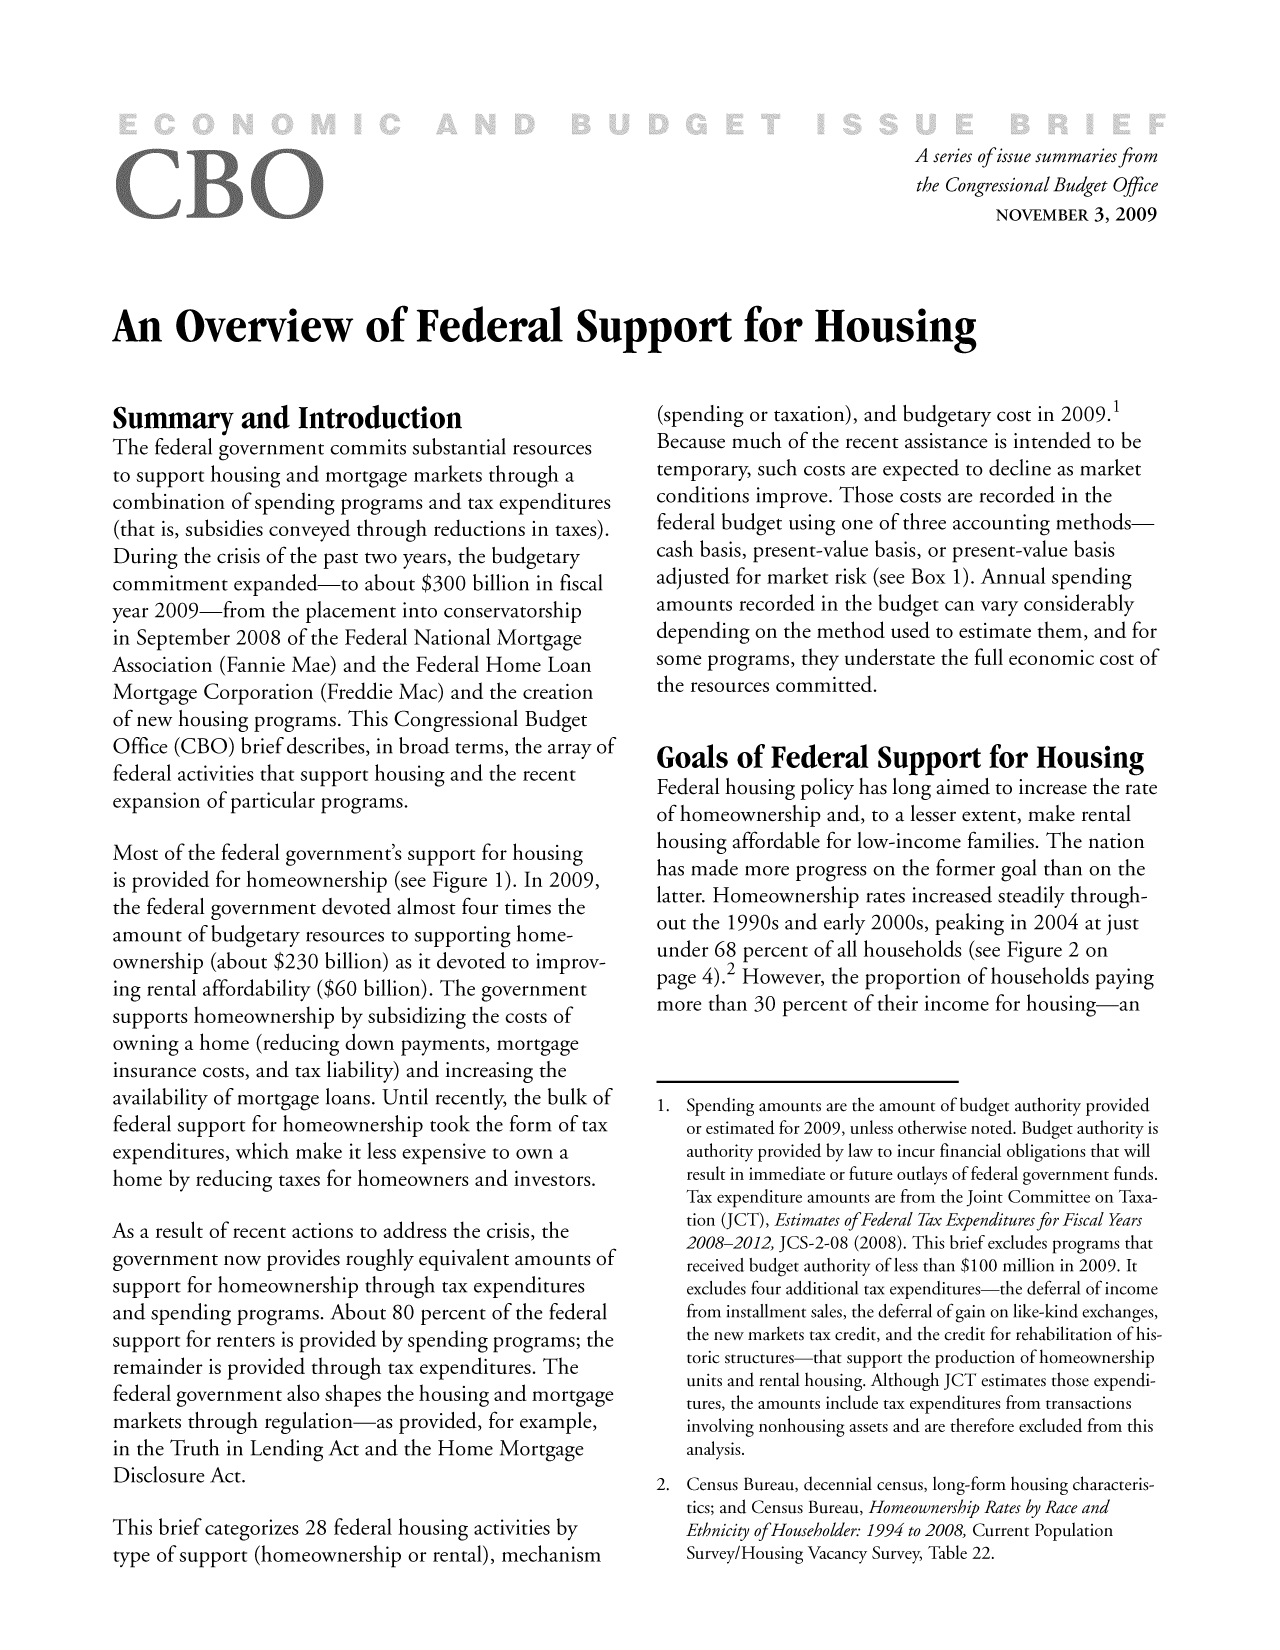 handle is hein.congrec/cbo9423 and id is 1 raw text is: A series ofissue summaries from
the Congressional Budget Office
NOVEMBER 3, 2009
An Overview of Federal Support for Housing

Summary and Introduction
The federal government commits substantial resources
to support housing and mortgage markets through a
combination of spending programs and tax expenditures
(that is, subsidies conveyed through reductions in taxes).
During the crisis of the past two years, the budgetary
commitment expanded-to about $300 billion in fiscal
year 2009-from the placement into conservatorship
in September 2008 of the Federal National Mortgage
Association (Fannie Mae) and the Federal Home Loan
Mortgage Corporation (Freddie Mac) and the creation
of new housing programs. This Congressional Budget
Office (CBO) brief describes, in broad terms, the array of
federal activities that support housing and the recent
expansion of particular programs.
Most of the federal government's support for housing
is provided for homeownership (see Figure 1). In 2009,
the federal government devoted almost four times the
amount of budgetary resources to supporting home-
ownership (about $230 billion) as it devoted to improv-
ing rental affordability ($60 billion). The government
supports homeownership by subsidizing the costs of
owning a home (reducing down payments, mortgage
insurance costs, and tax liability) and increasing the
availability of mortgage loans. Until recently, the bulk of
federal support for homeownership took the form of tax
expenditures, which make it less expensive to own a
home by reducing taxes for homeowners and investors.
As a result of recent actions to address the crisis, the
government now provides roughly equivalent amounts of
support for homeownership through tax expenditures
and spending programs. About 80 percent of the federal
support for renters is provided by spending programs; the
remainder is provided through tax expenditures. The
federal government also shapes the housing and mortgage
markets through regulation-as provided, for example,
in the Truth in Lending Act and the Home Mortgage
Disclosure Act.
This brief categorizes 28 federal housing activities by
type of support (homeownership or rental), mechanism

(spending or taxation), and budgetary cost in 2009.1
Because much of the recent assistance is intended to be
temporary, such costs are expected to decline as market
conditions improve. Those costs are recorded in the
federal budget using one of three accounting methods
cash basis, present-value basis, or present-value basis
adjusted for market risk (see Box 1). Annual spending
amounts recorded in the budget can vary considerably
depending on the method used to estimate them, and for
some programs, they understate the full economic cost of
the resources committed.
Goals of Federal Support for Housing
Federal housing policy has long aimed to increase the rate
of homeownership and, to a lesser extent, make rental
housing affordable for low-income families. The nation
has made more progress on the former goal than on the
latter. Homeownership rates increased steadily through-
out the 1990s and early 2000s, peaking in 2004 at just
under 68 percent of all households (see Figure 2 on
page 4).2 However, the proportion of households paying
more than 30 percent of their income for housing-an
1. Spending amounts are the amount of budget authority provided
or estimated for 2009, unless otherwise noted. Budget authority is
authority provided by law to incur financial obligations that will
result in immediate or future outlays of federal government funds.
Tax expenditure amounts are from the Joint Committee on Taxa-
tion (JCT), Estimates ofFederal Tax Expenditures for Fiscal Years
2008-2012, JCS-2-08 (2008). This brief excludes programs that
received budget authority of less than $100 million in 2009. It
excludes four additional tax expenditures-the deferral of income
from installment sales, the deferral of gain on like-kind exchanges,
the new markets tax credit, and the credit for rehabilitation of his-
toric structures-that support the production of homeownership
units and rental housing. Although JCT estimates those expendi-
tures, the amounts include tax expenditures from transactions
involving nonhousing assets and are therefore excluded from this
analysis.
2. Census Bureau, decennial census, long-form housing characteris-
tics; and Census Bureau, Homeownership Rates by Race and
Ethnicity of Householder: 1994 to 2008 Current Population
Survey/Housing Vacancy Survey, Table 22.


